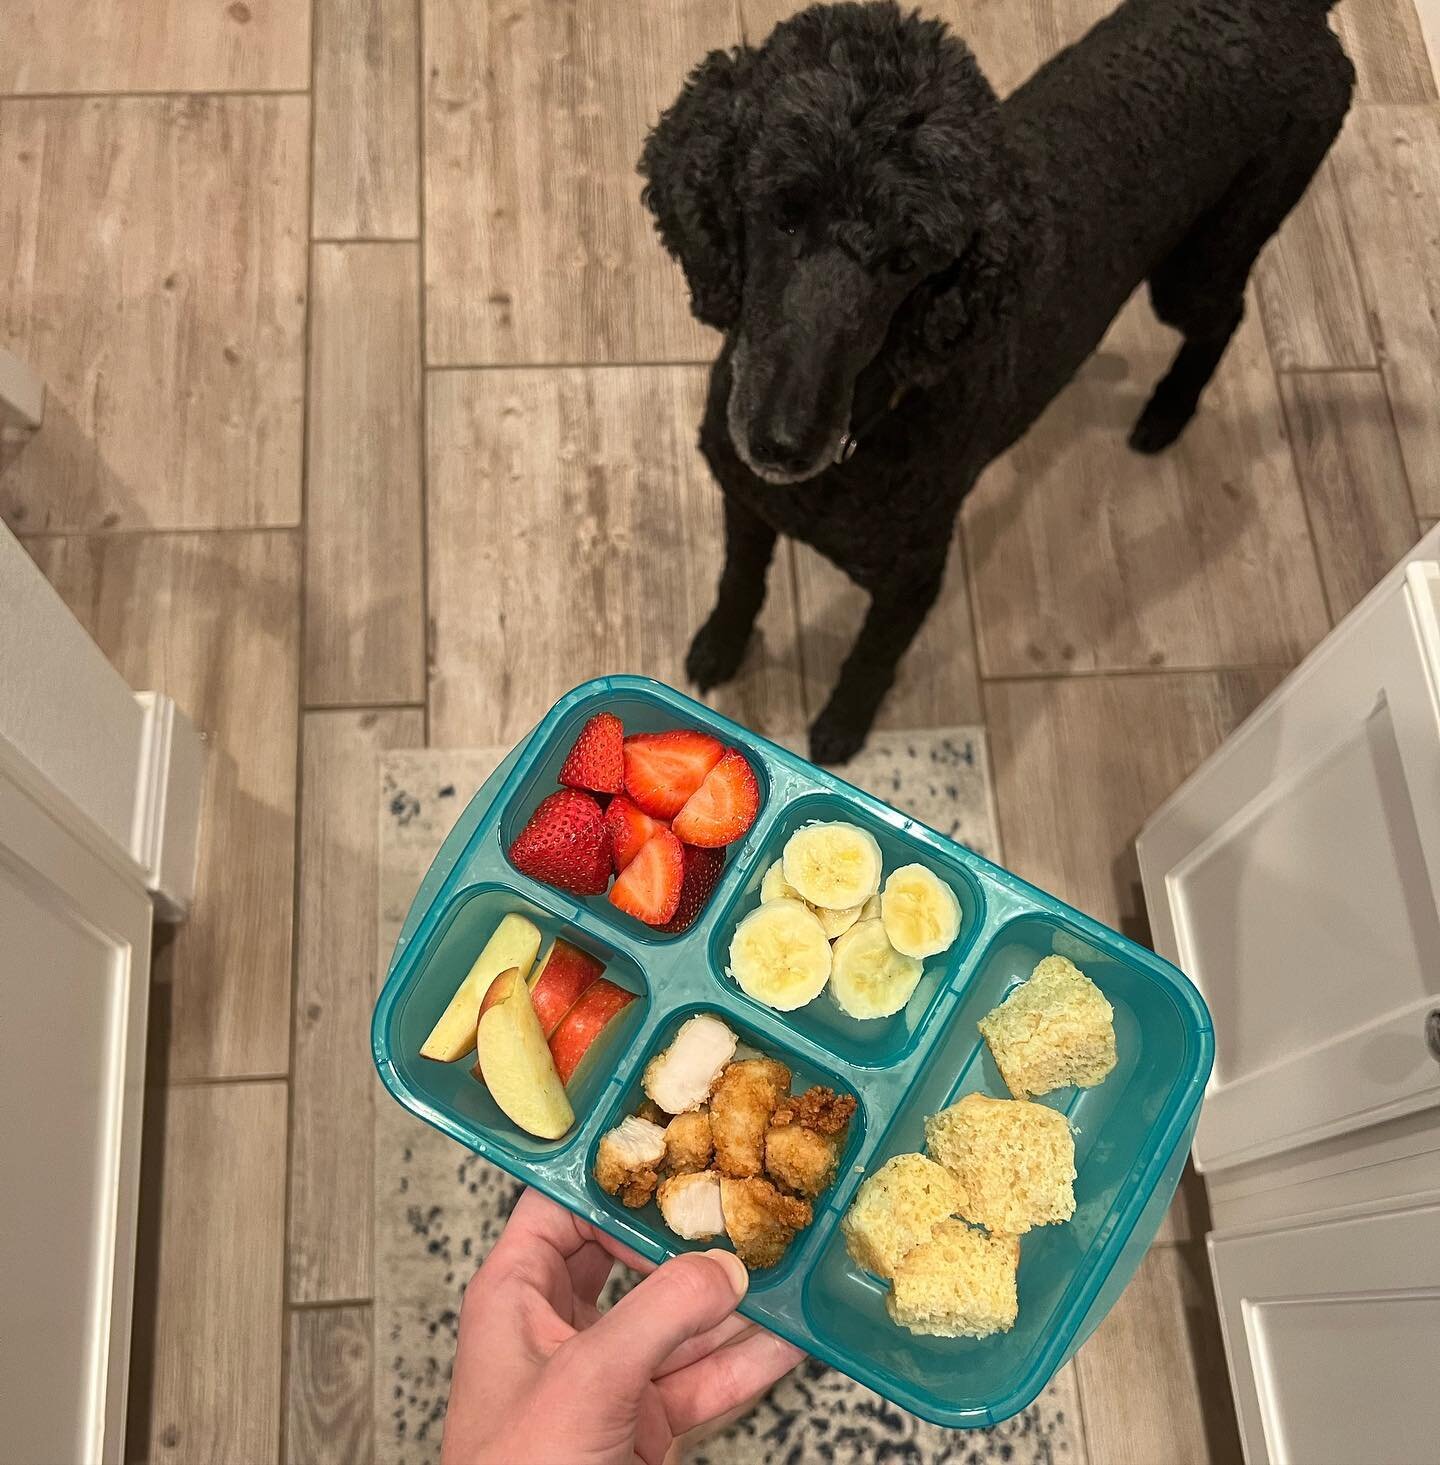 a new weekly series: a round up of the packed lunches and pool/play date snacks I remembered to photograph this week ❤️

however you feed your family is wonderful. this is just a few ways I feed mine ❤️